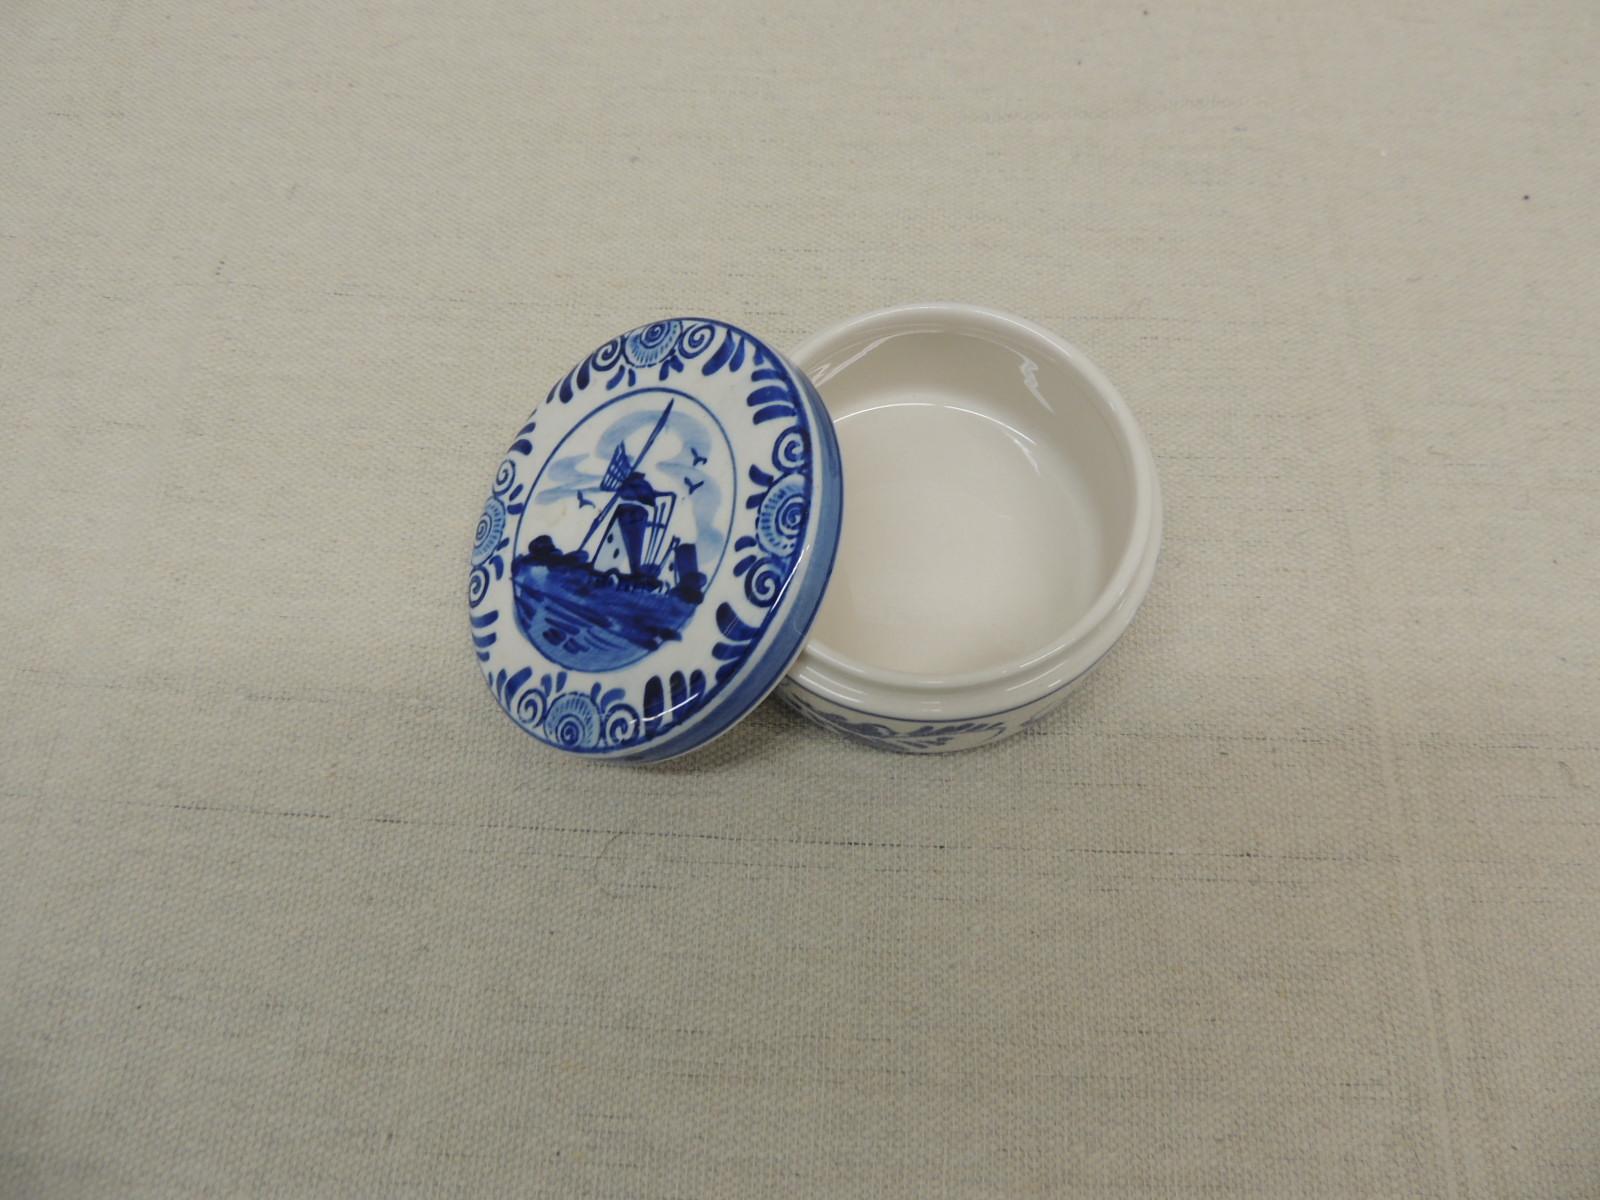 Small round delft blue and white trinket box with lid.
Delftware pottery.
Faience pottery.
Size: 3.25 x 1.75.
 